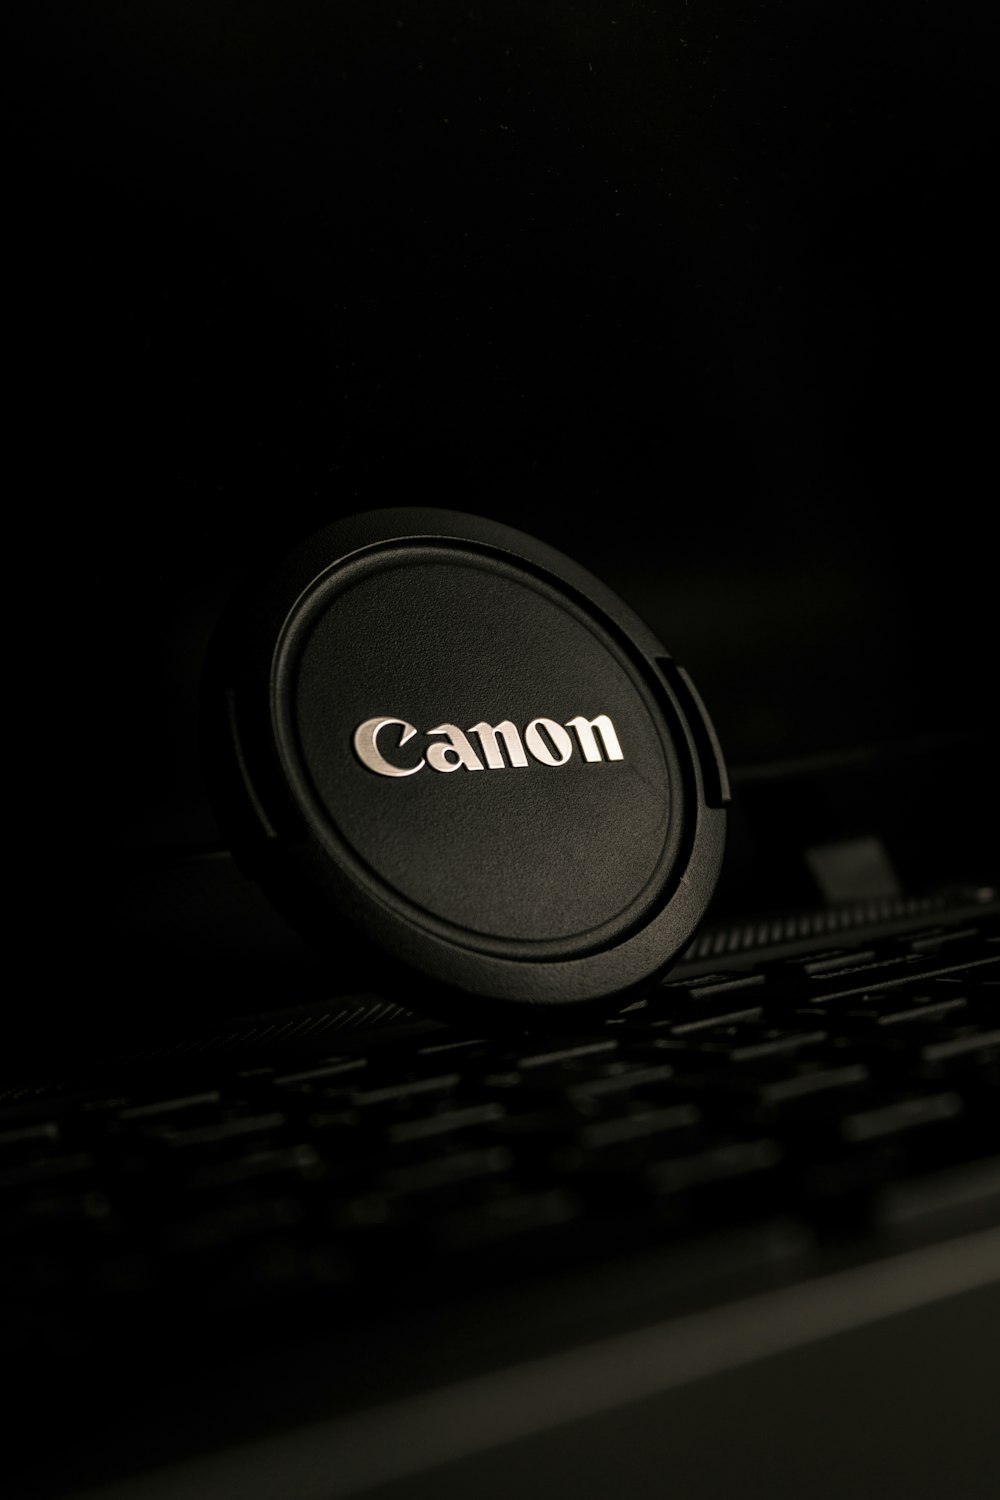 a close up of a camera lens cap on a keyboard